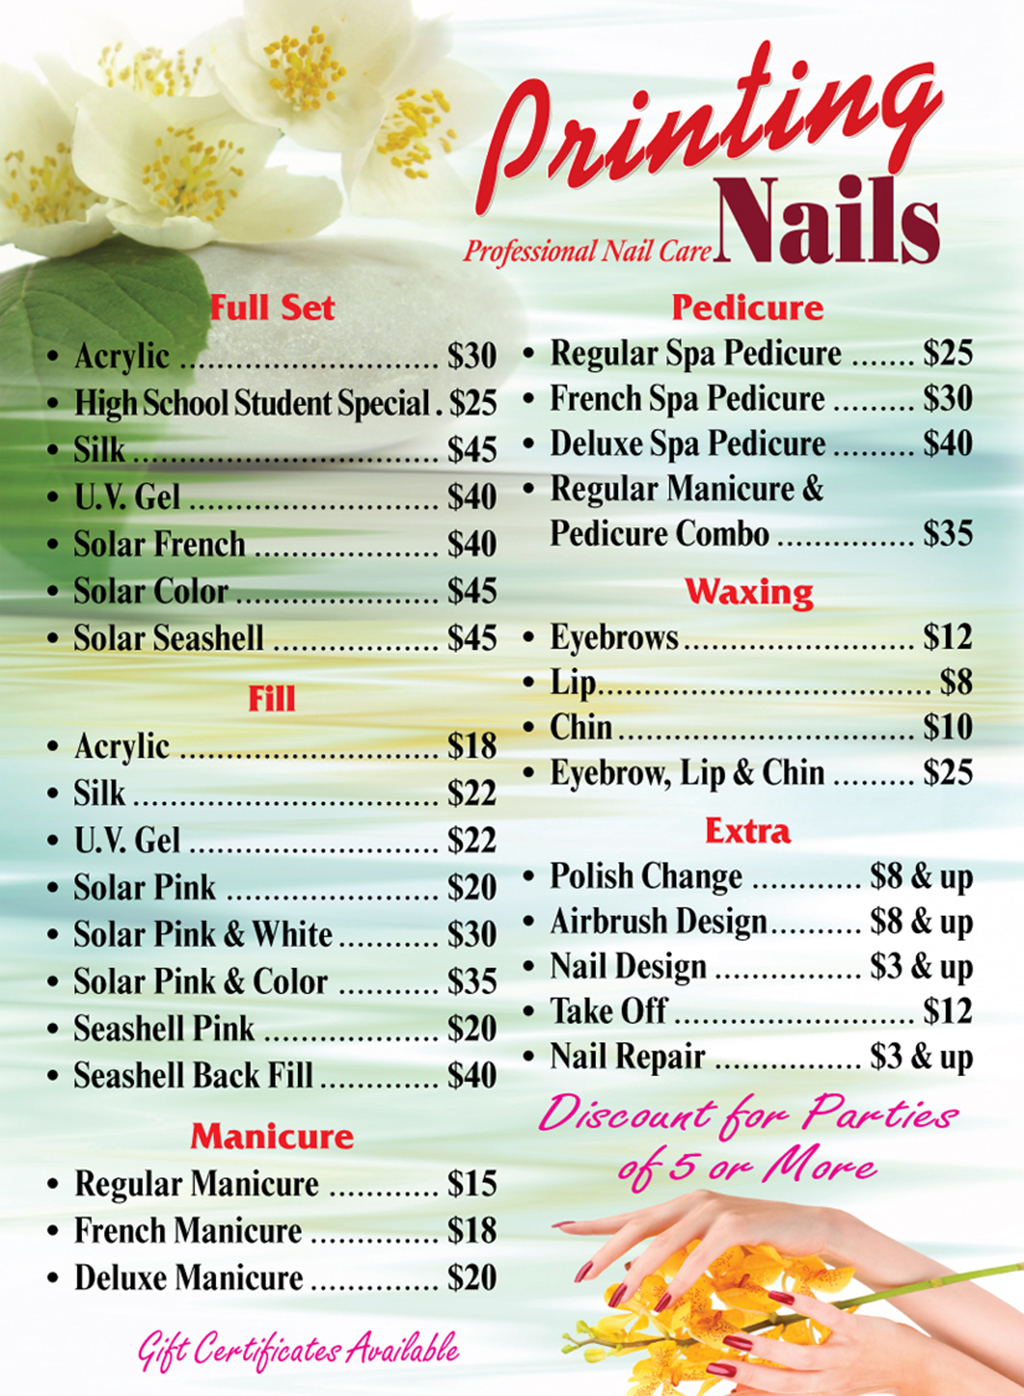 Price List Poster Size 24×36 | Nails Printing – (714) 244-2903